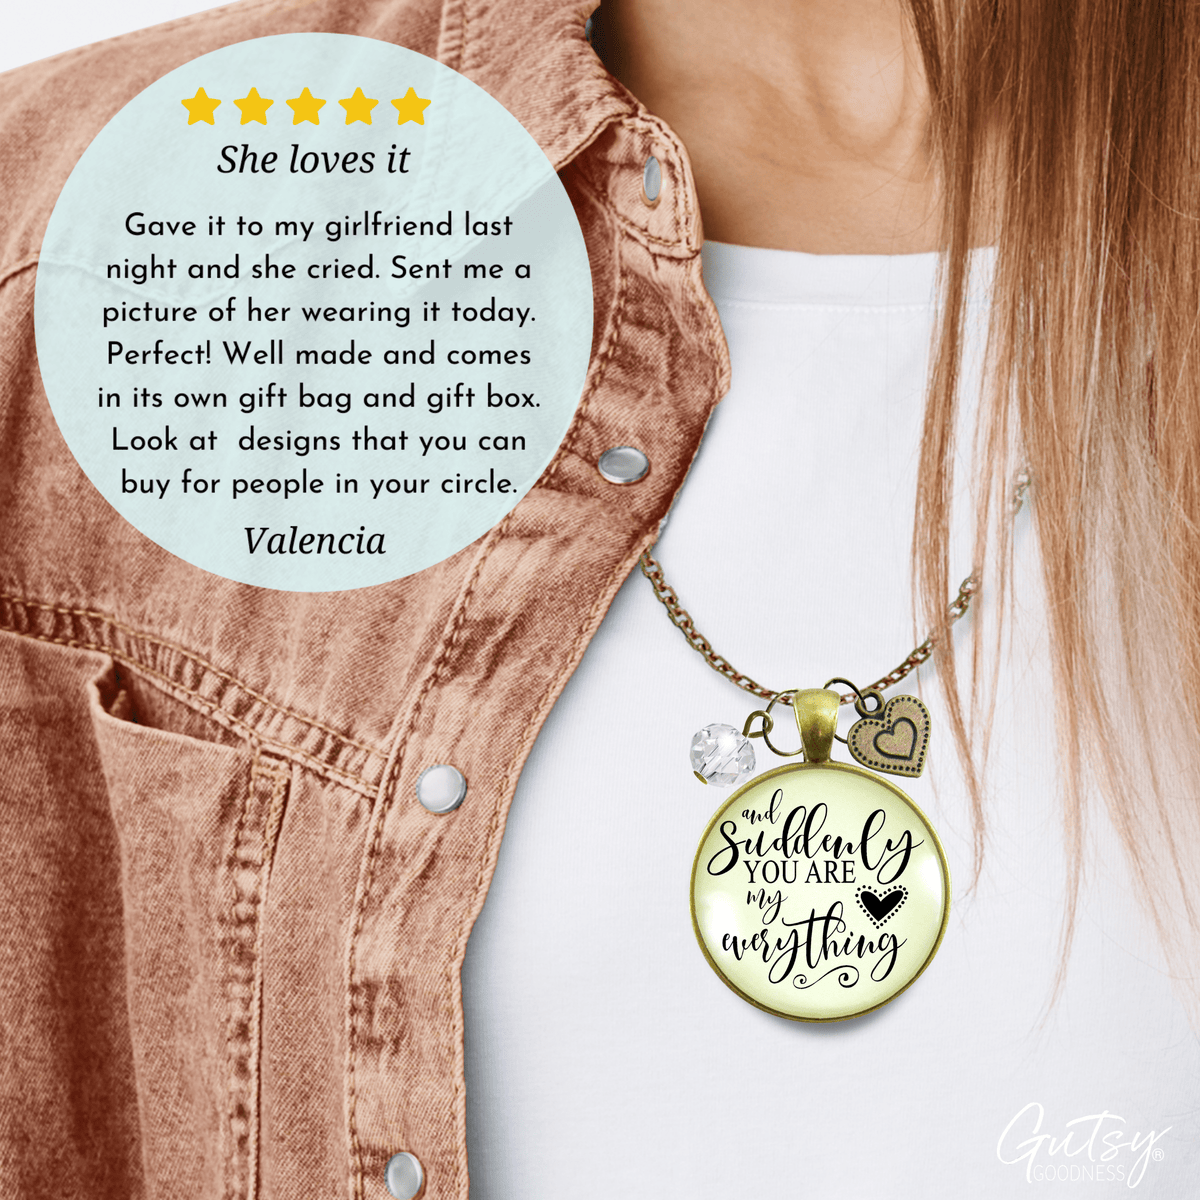 Gutsy Goodness First Mothers Day Necklace Suddenly You are My Everything Mom Jewelry - Gutsy Goodness;First Mothers Day Necklace Suddenly You Are My Everything Mom Jewelry - Gutsy Goodness Handmade Jewelry Gifts